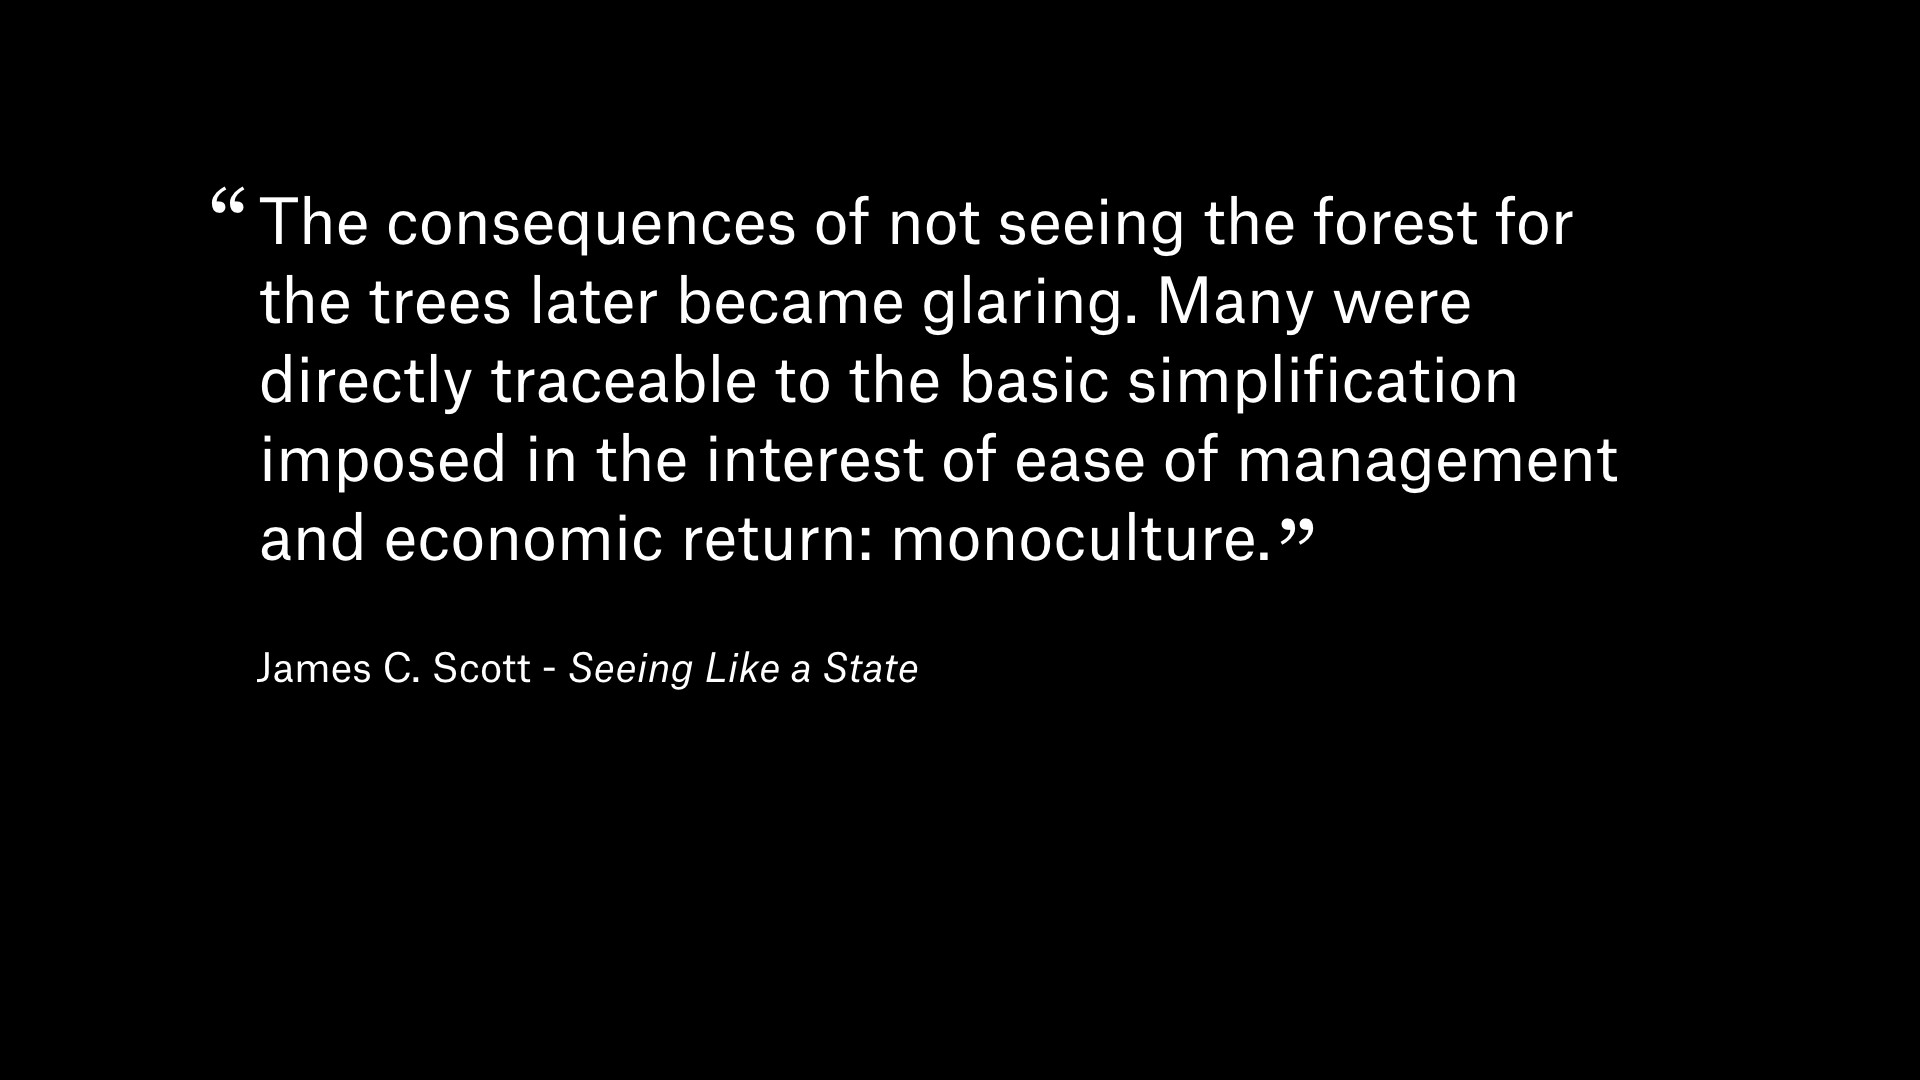 Quote by James C. Scote in 'Seeing Like a State': The consequences of not seeing the forest for the trees later became glaring. Many were directly traceable to the basics to the basis simplification imposed in the interest of ease of management and economic return: monoculture.